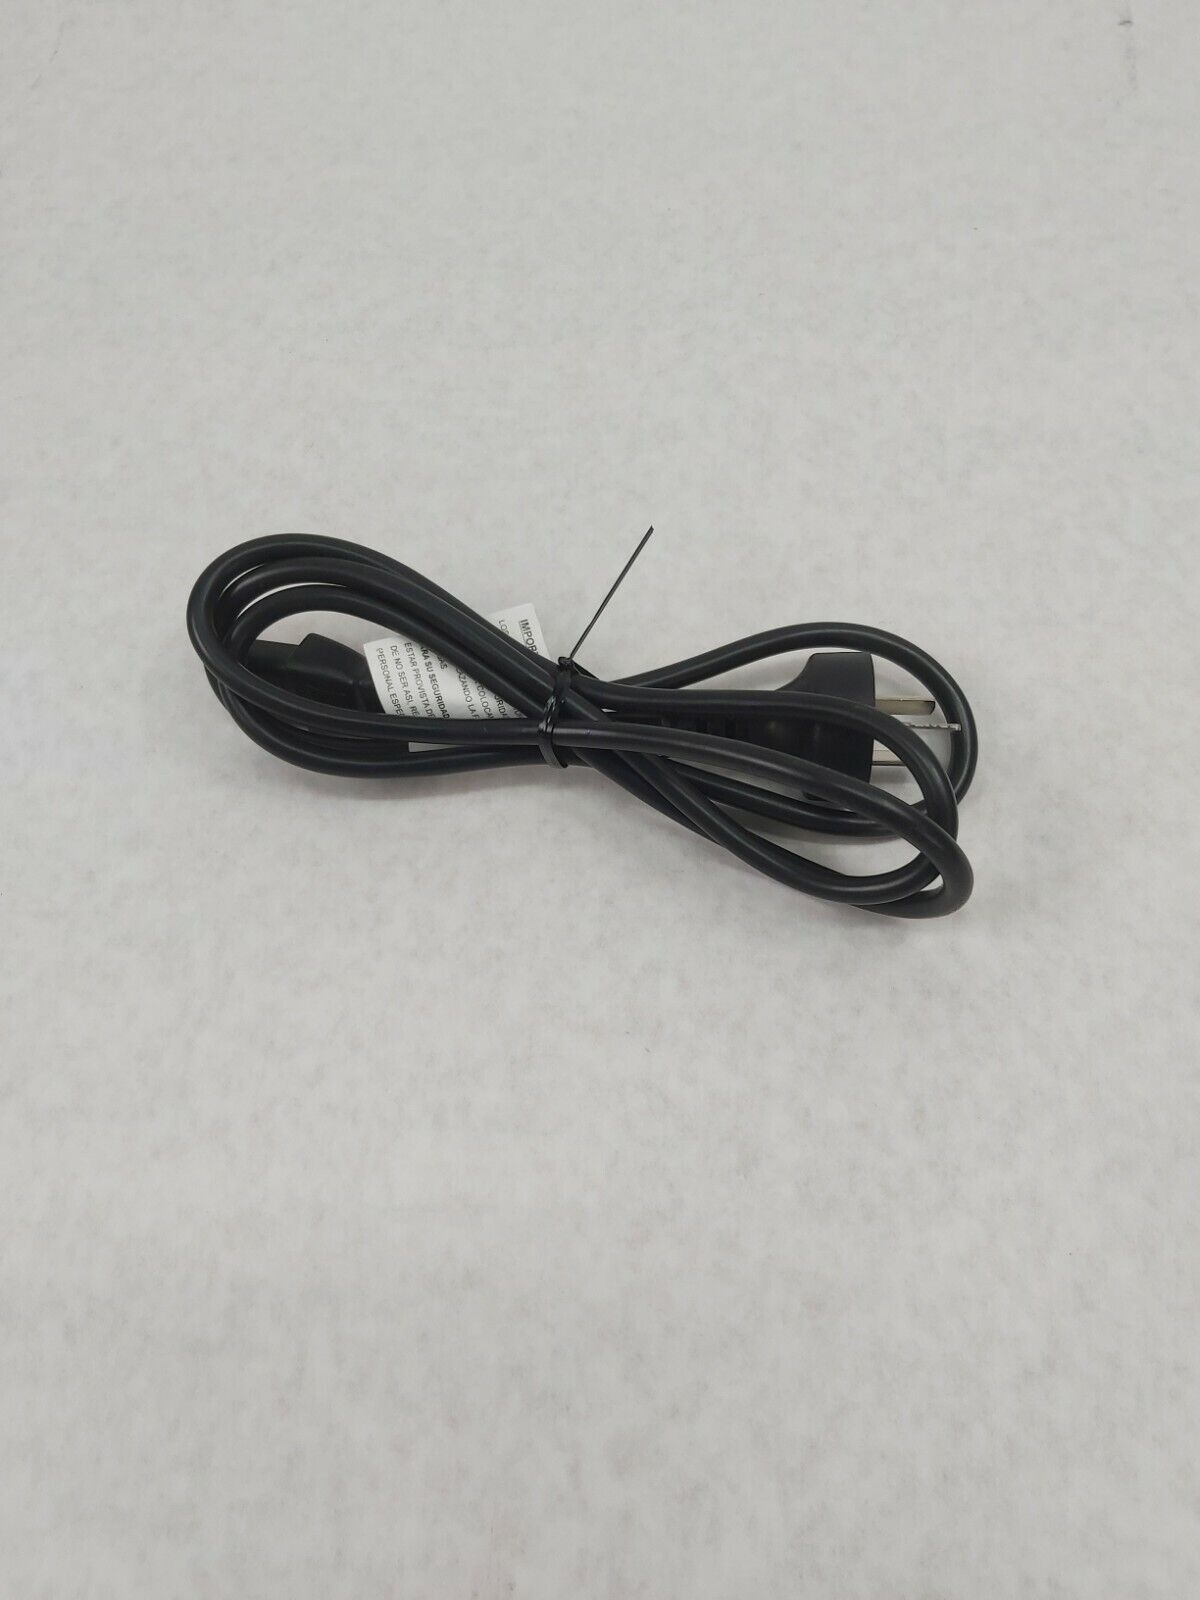 60 Inch Type I Computer Cord